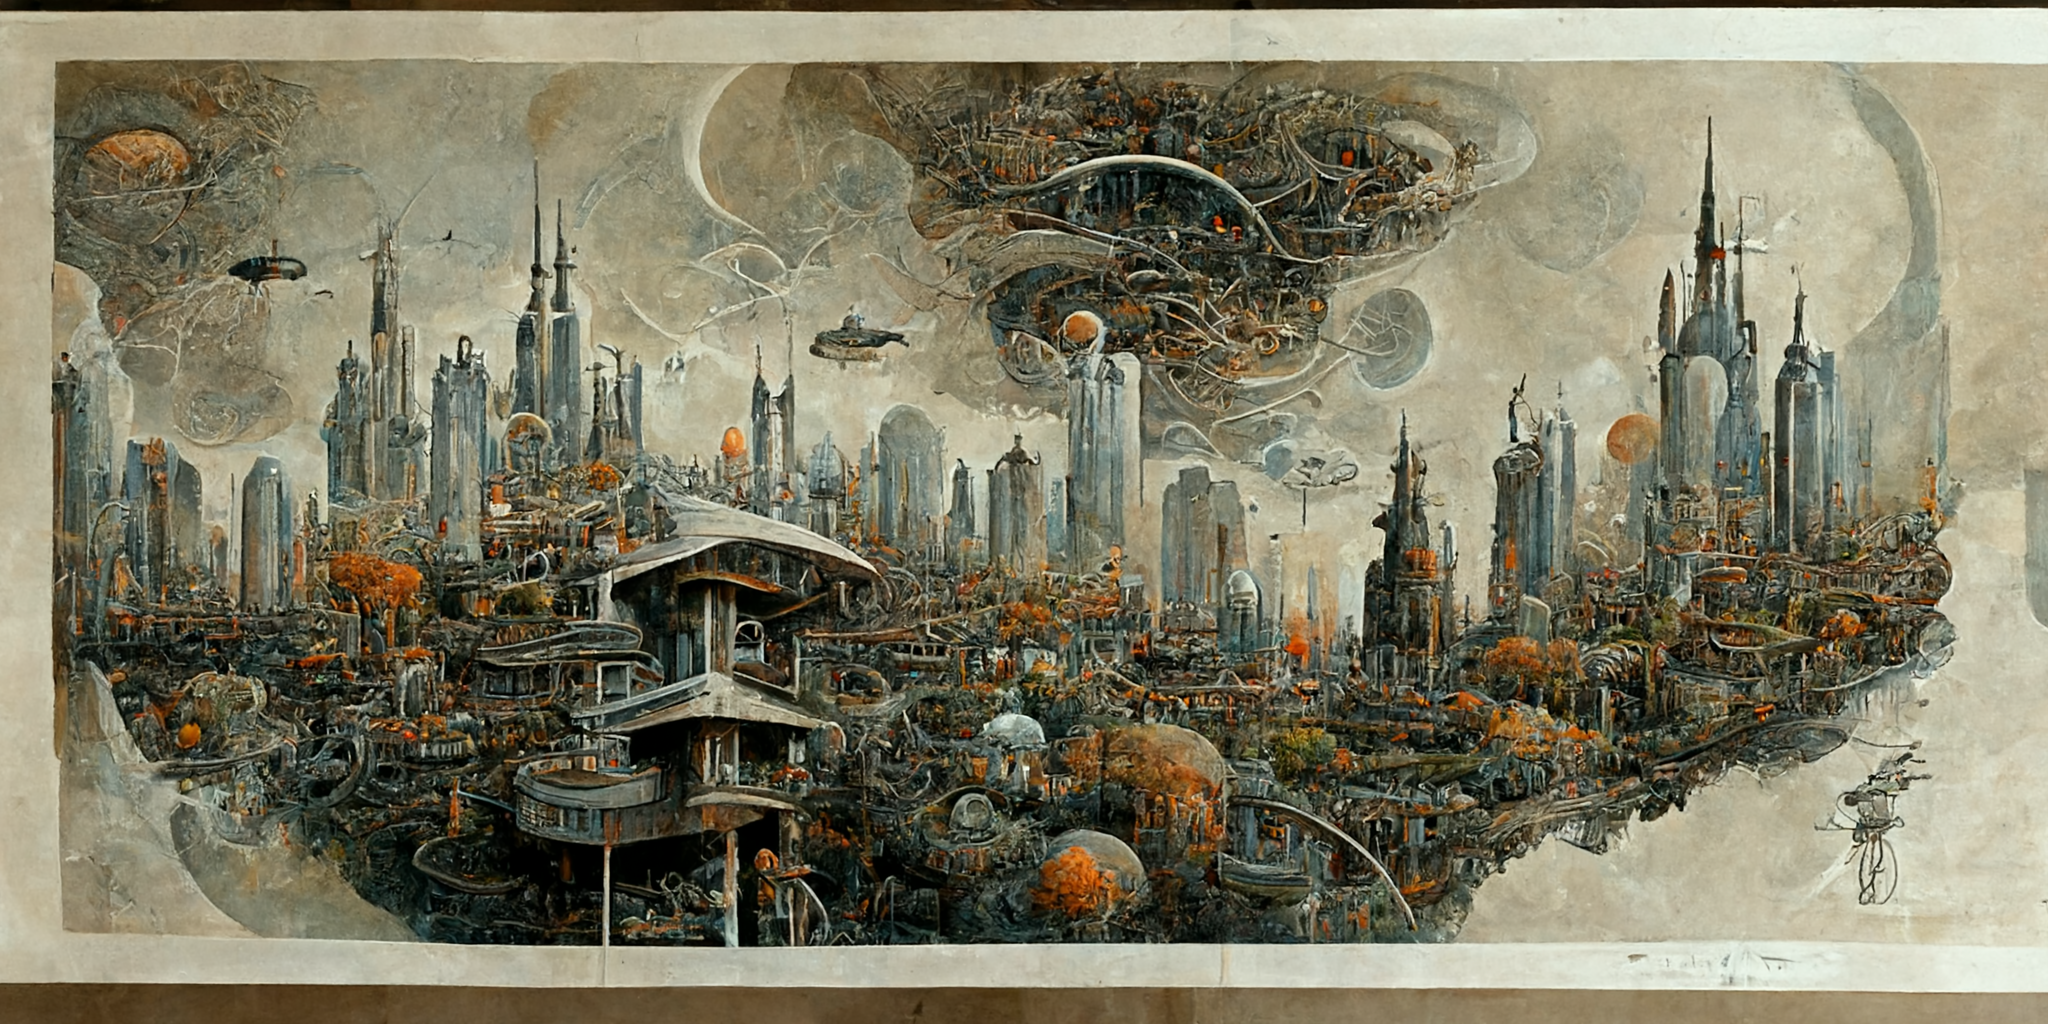 OM3N1R_suburban_area_of_an_alien_city_elevated_view_skyscrapers_735a60d0-f587-4a6d-90db-8ecadf138926.png